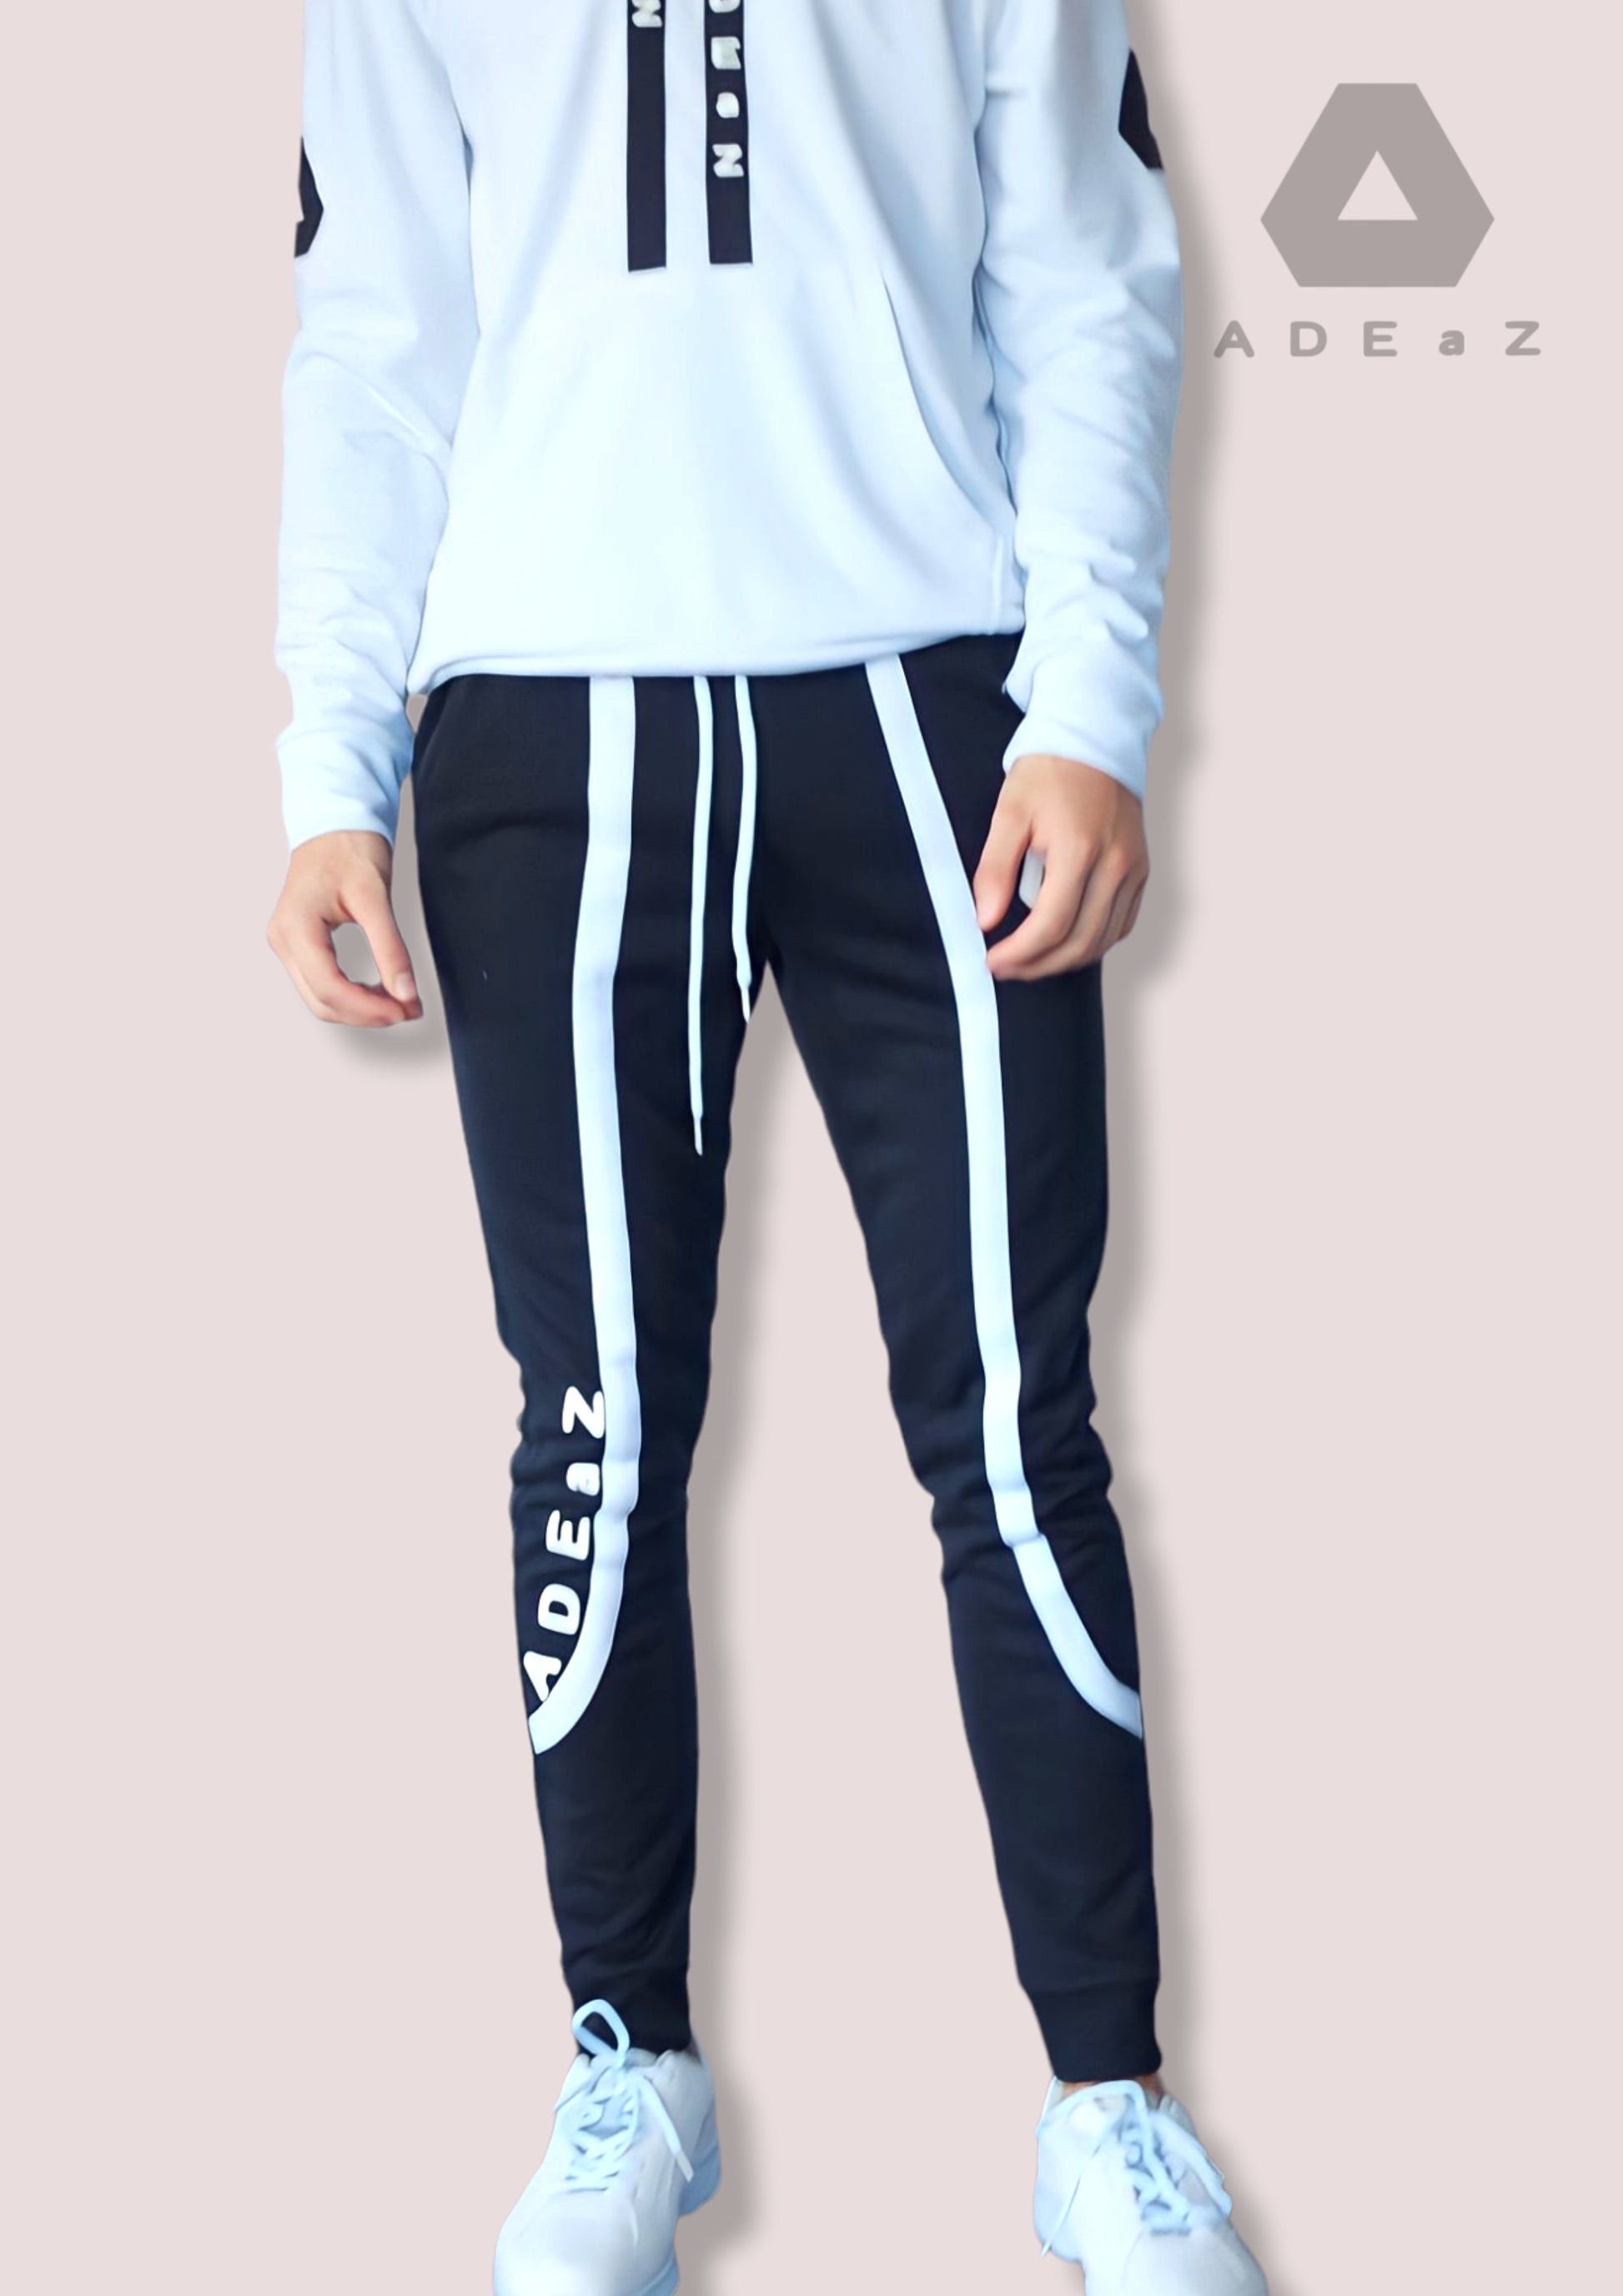 Men's Comfy Stripe Jogger: Relaxing and stylish striped jogger pants for comfortable leisure